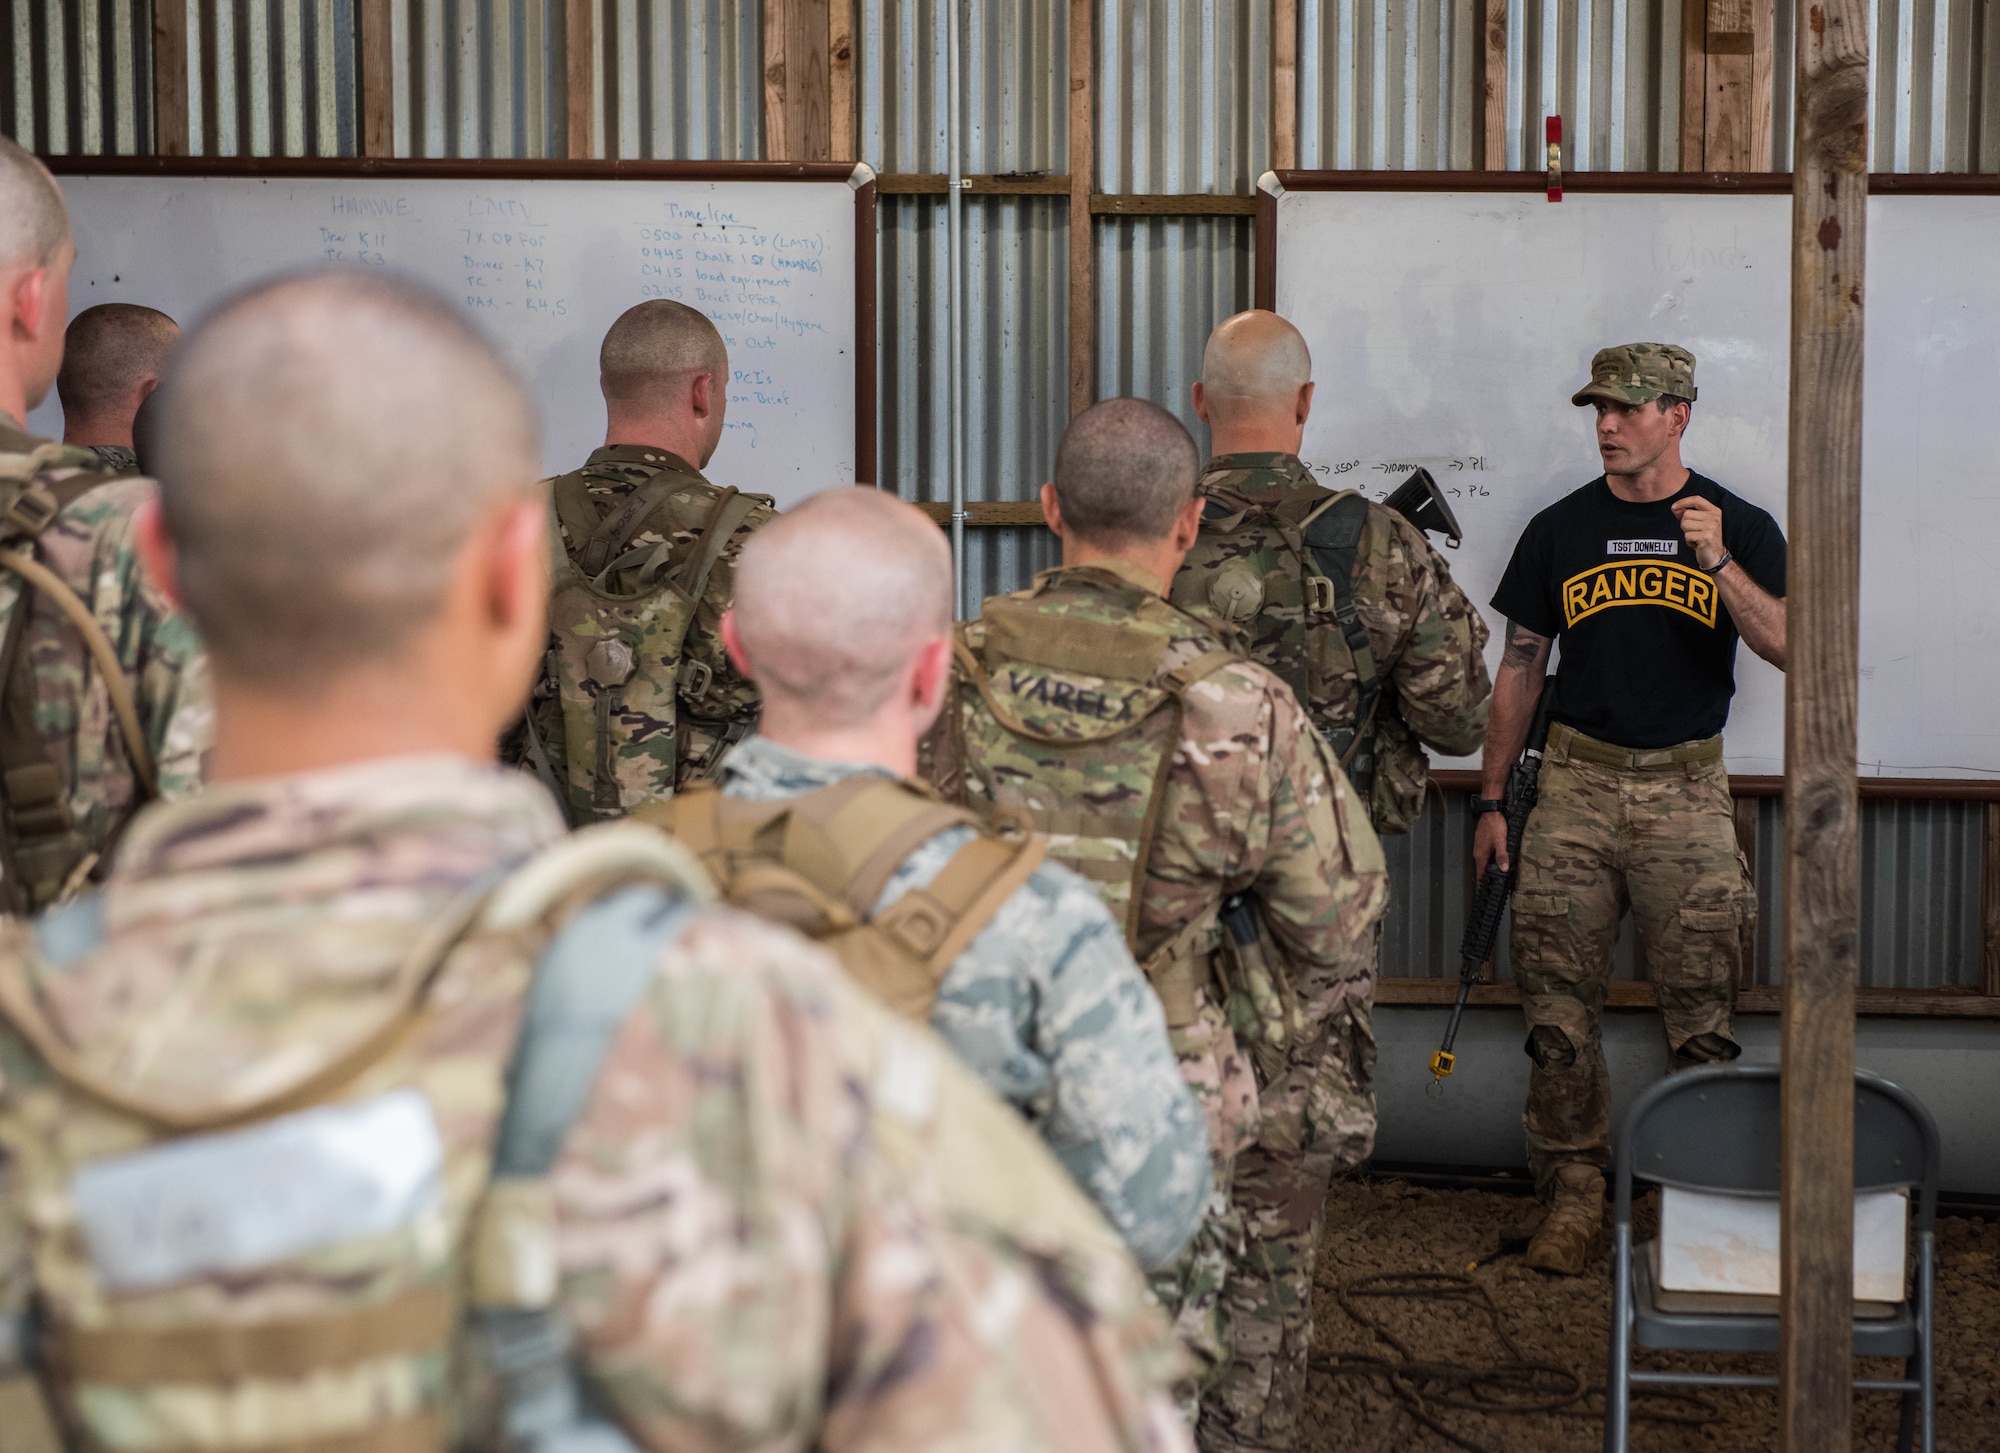 Tech. Sgt. Keegan Donnelly, Ranger Assessment Course lead cadre, talks to Airmen about land navigation during the Ranger Assessment Course, near Schofield Barracks, Oahu, Hawaii, May 13, 2019. Twenty-three Airmen from across the Air Force recently converged on a training camp for a three-week RAC near Schofield Barracks, May 12-31, 2019. For this iteration, the Air Force collaborated with the Army’s 25th Infantry Division, Small Unit Ranger Tactics Program – their version of a pre-Ranger course – in order to gain a better understanding for the way the Army prepares their candidates for Ranger School. (U.S. Air Force photo by Staff Sgt. Hailey Haux)